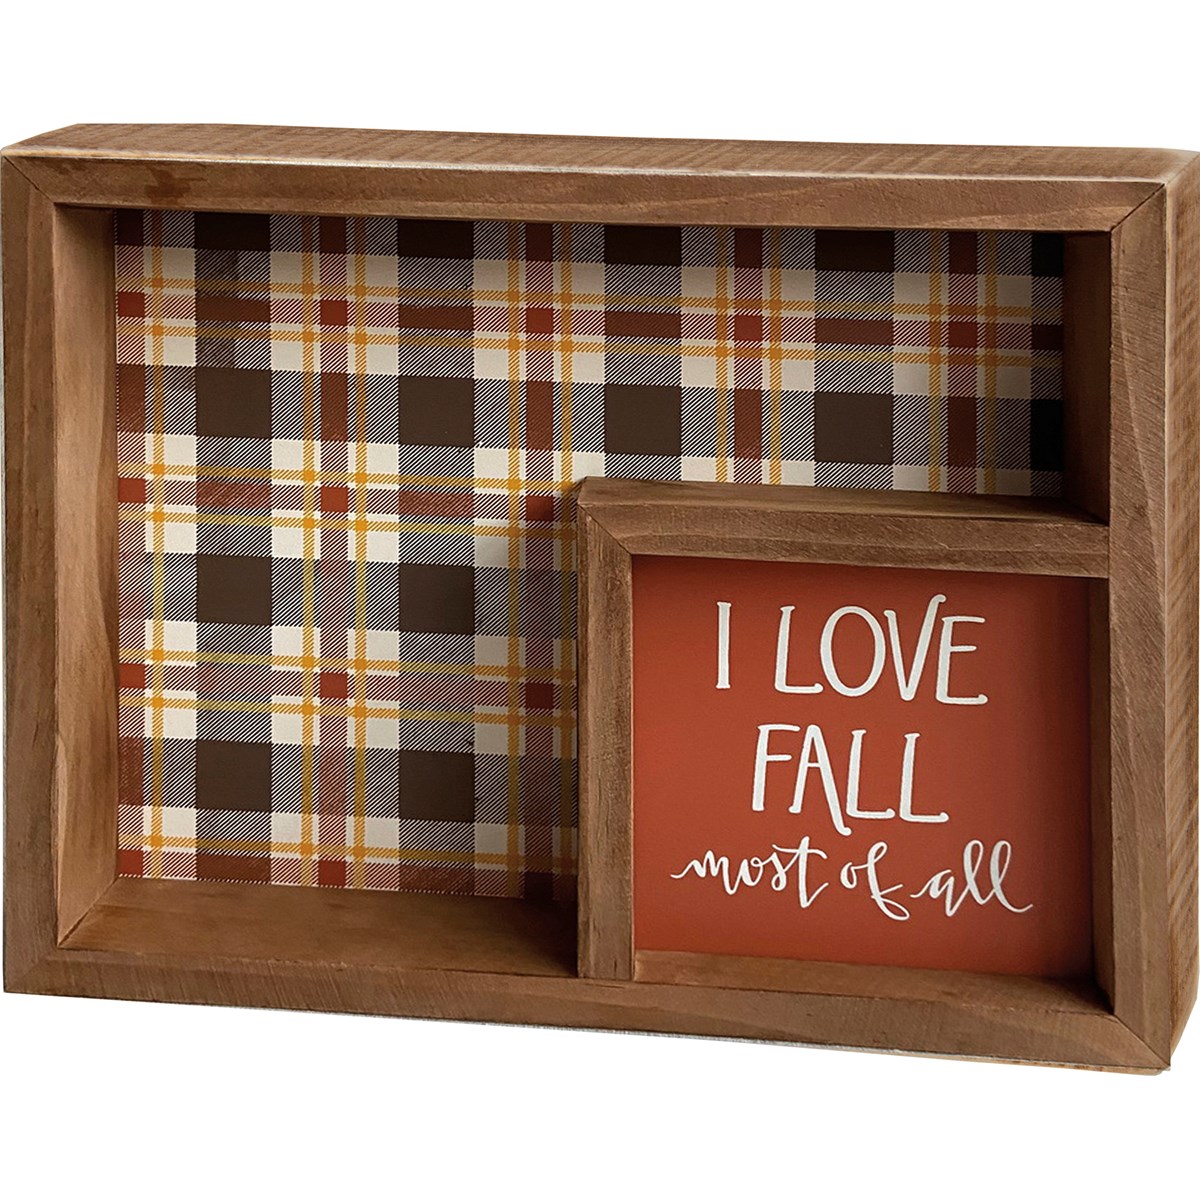 Fall Most Of All Inset Box Sign - Wood